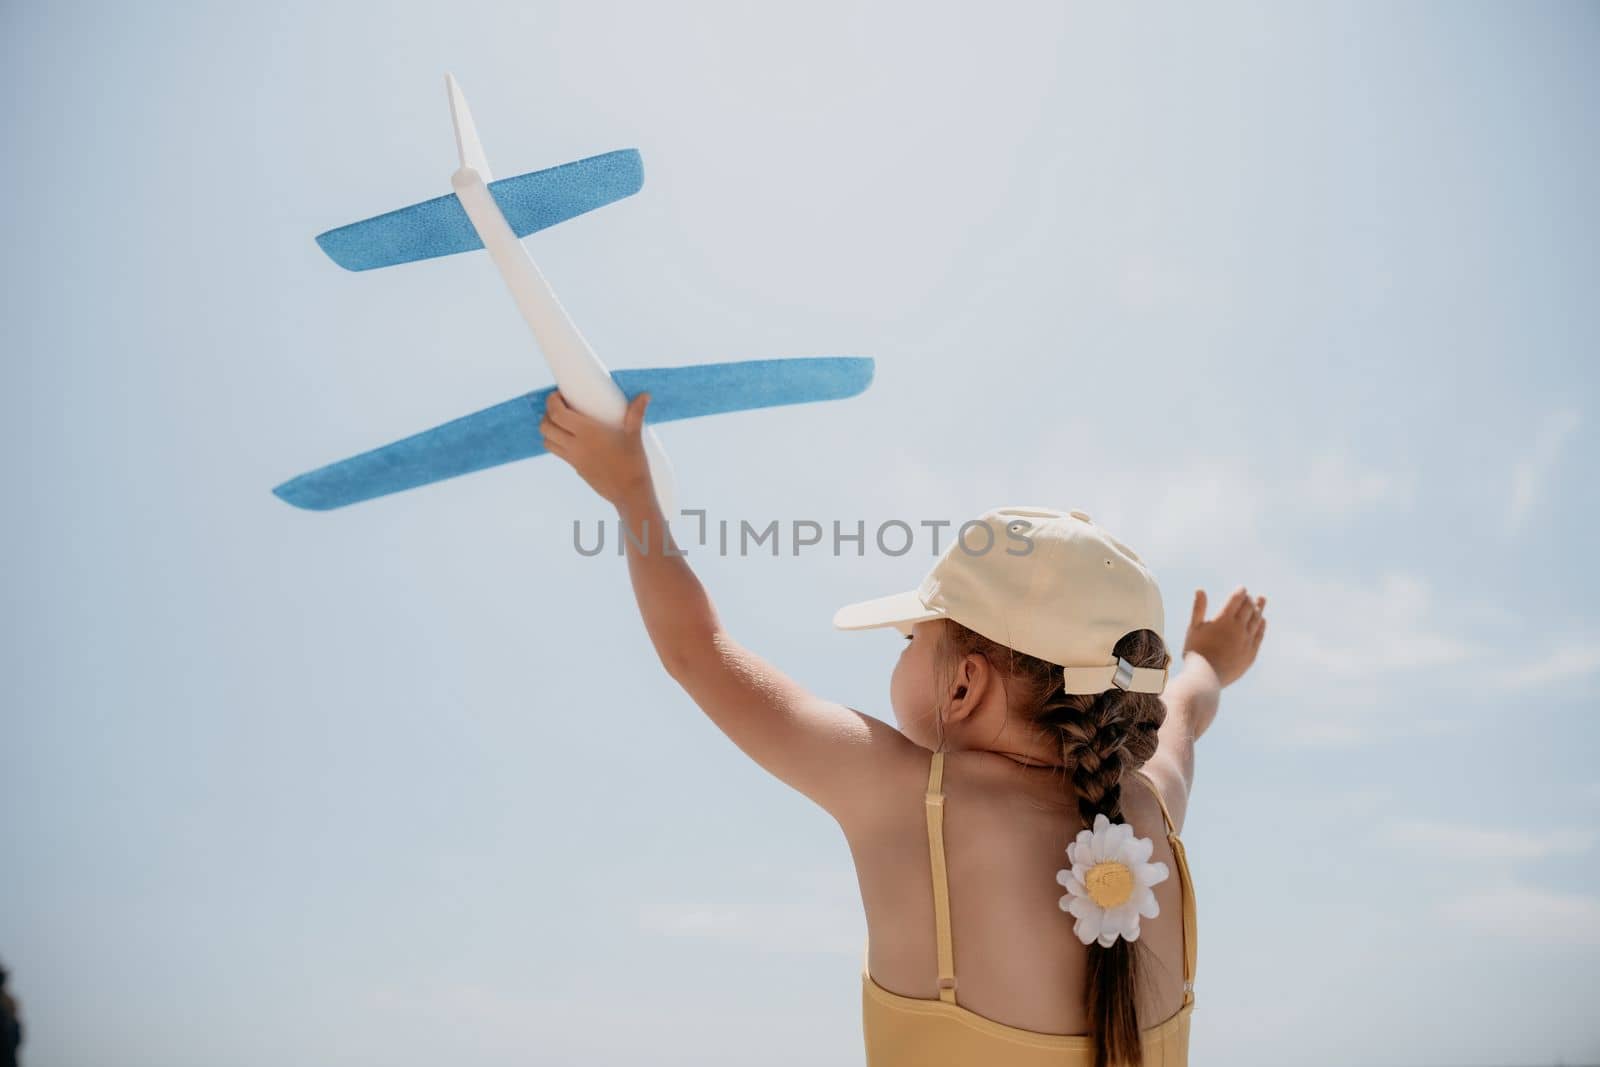 Kid playing with toy airplane. Children dream of travel by plane. Happy child girl has fun in summer vacation by sea and mountains. Outdoors activities at background of blue sky. Lifestyle moment